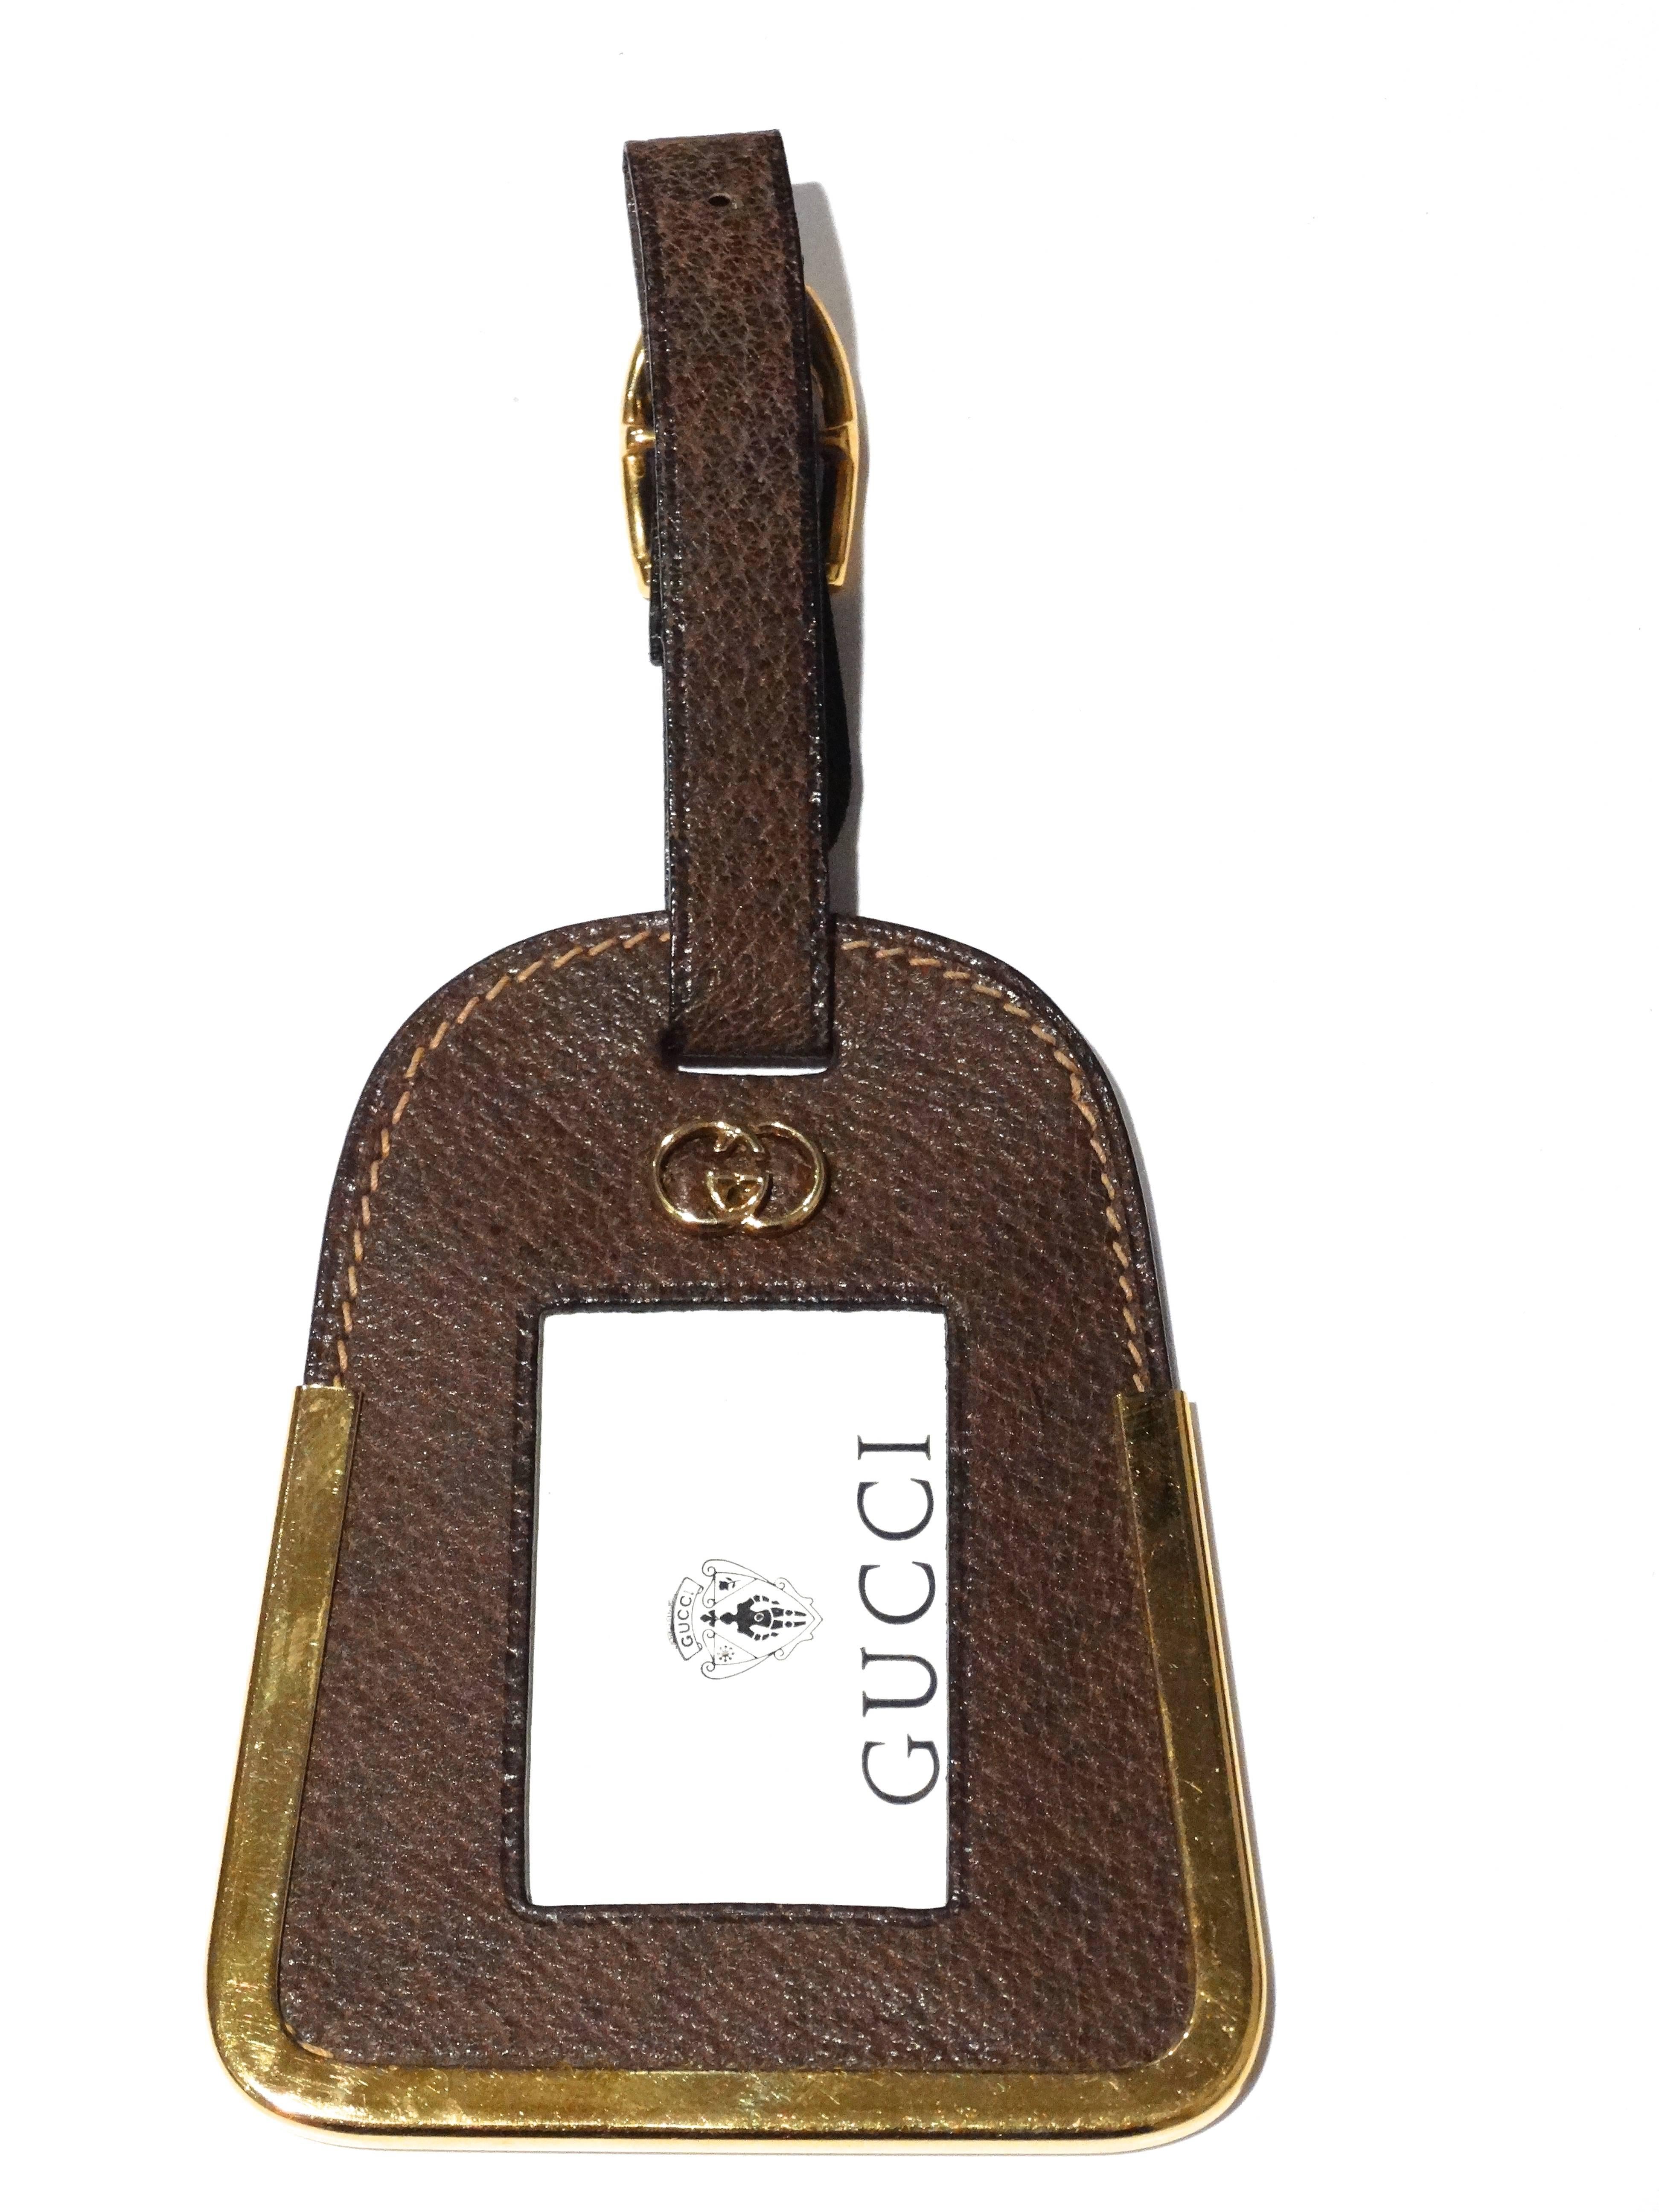 RARE and Often seen,  fine vintage GUCCI circa 1970's!  This luggage tag is in near new condition, AMAZING tag - a style that is no longer manufactured.  Great on a belt loop or wear as a pendent necklace. Crafted in supple tanned leather. Gold-tone